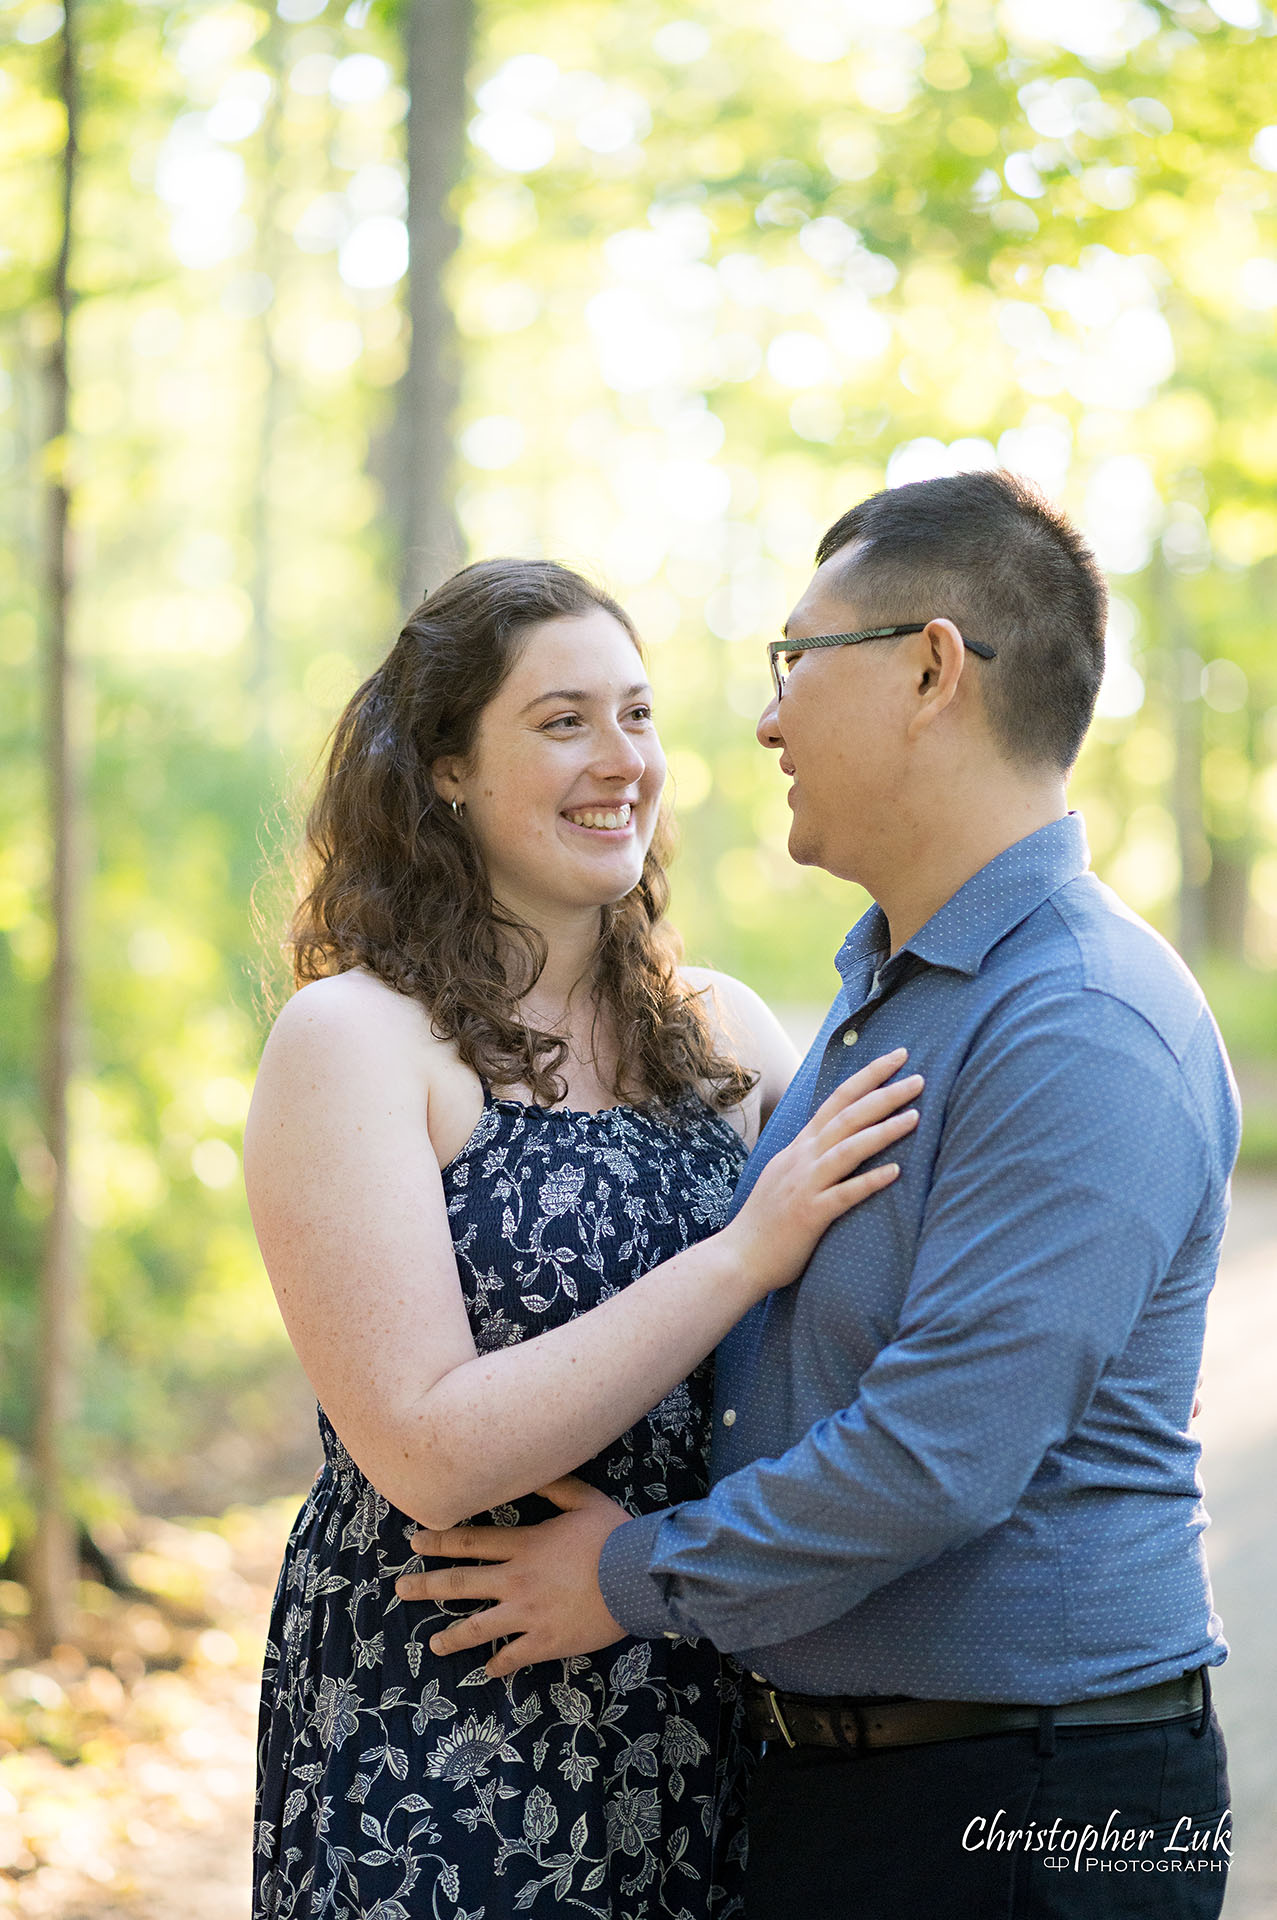 Christopher Luk Toronto Wedding Photographer Markham Forest Engagement Photos Pictures Session Bride Groom Hug Hold Intimate Looking At Each Other Candid Natural Organic Photojournalistic Portrait